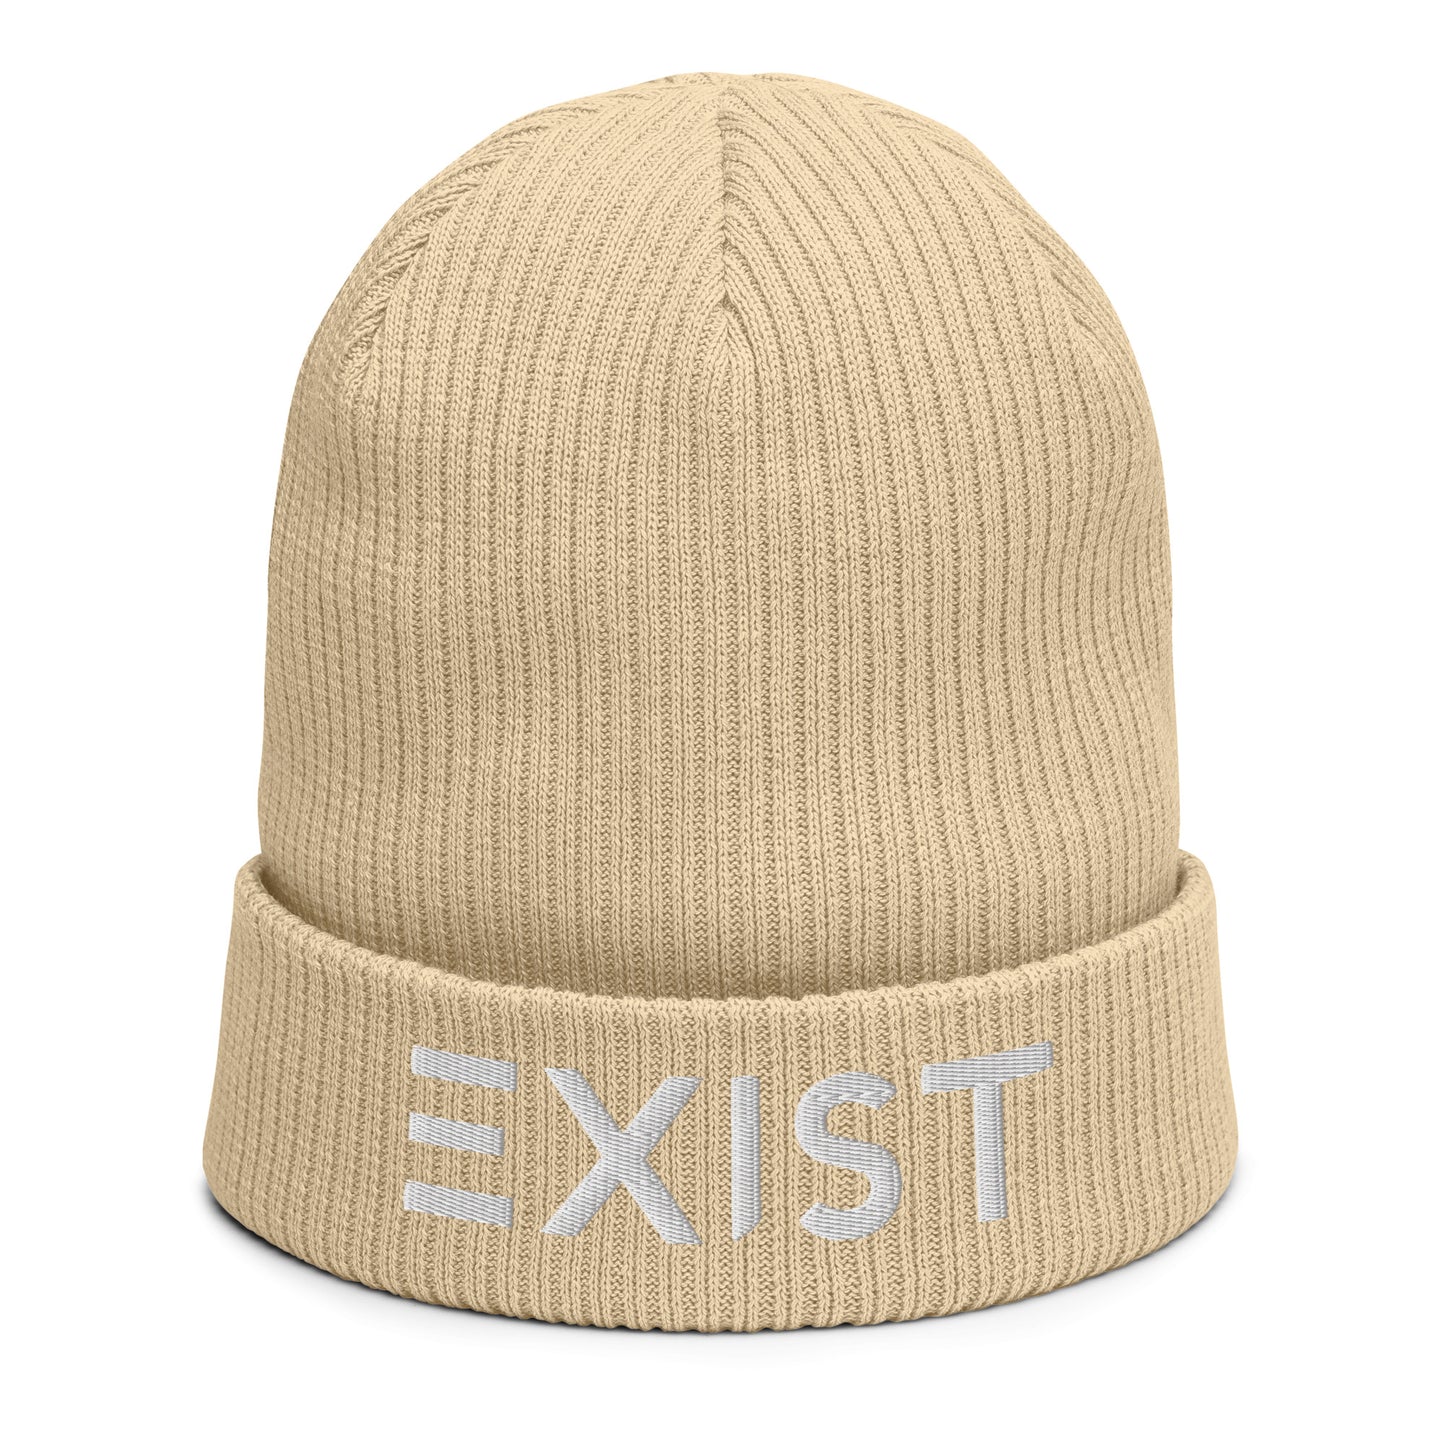 Exist Organic ribbed beanie (White Text)